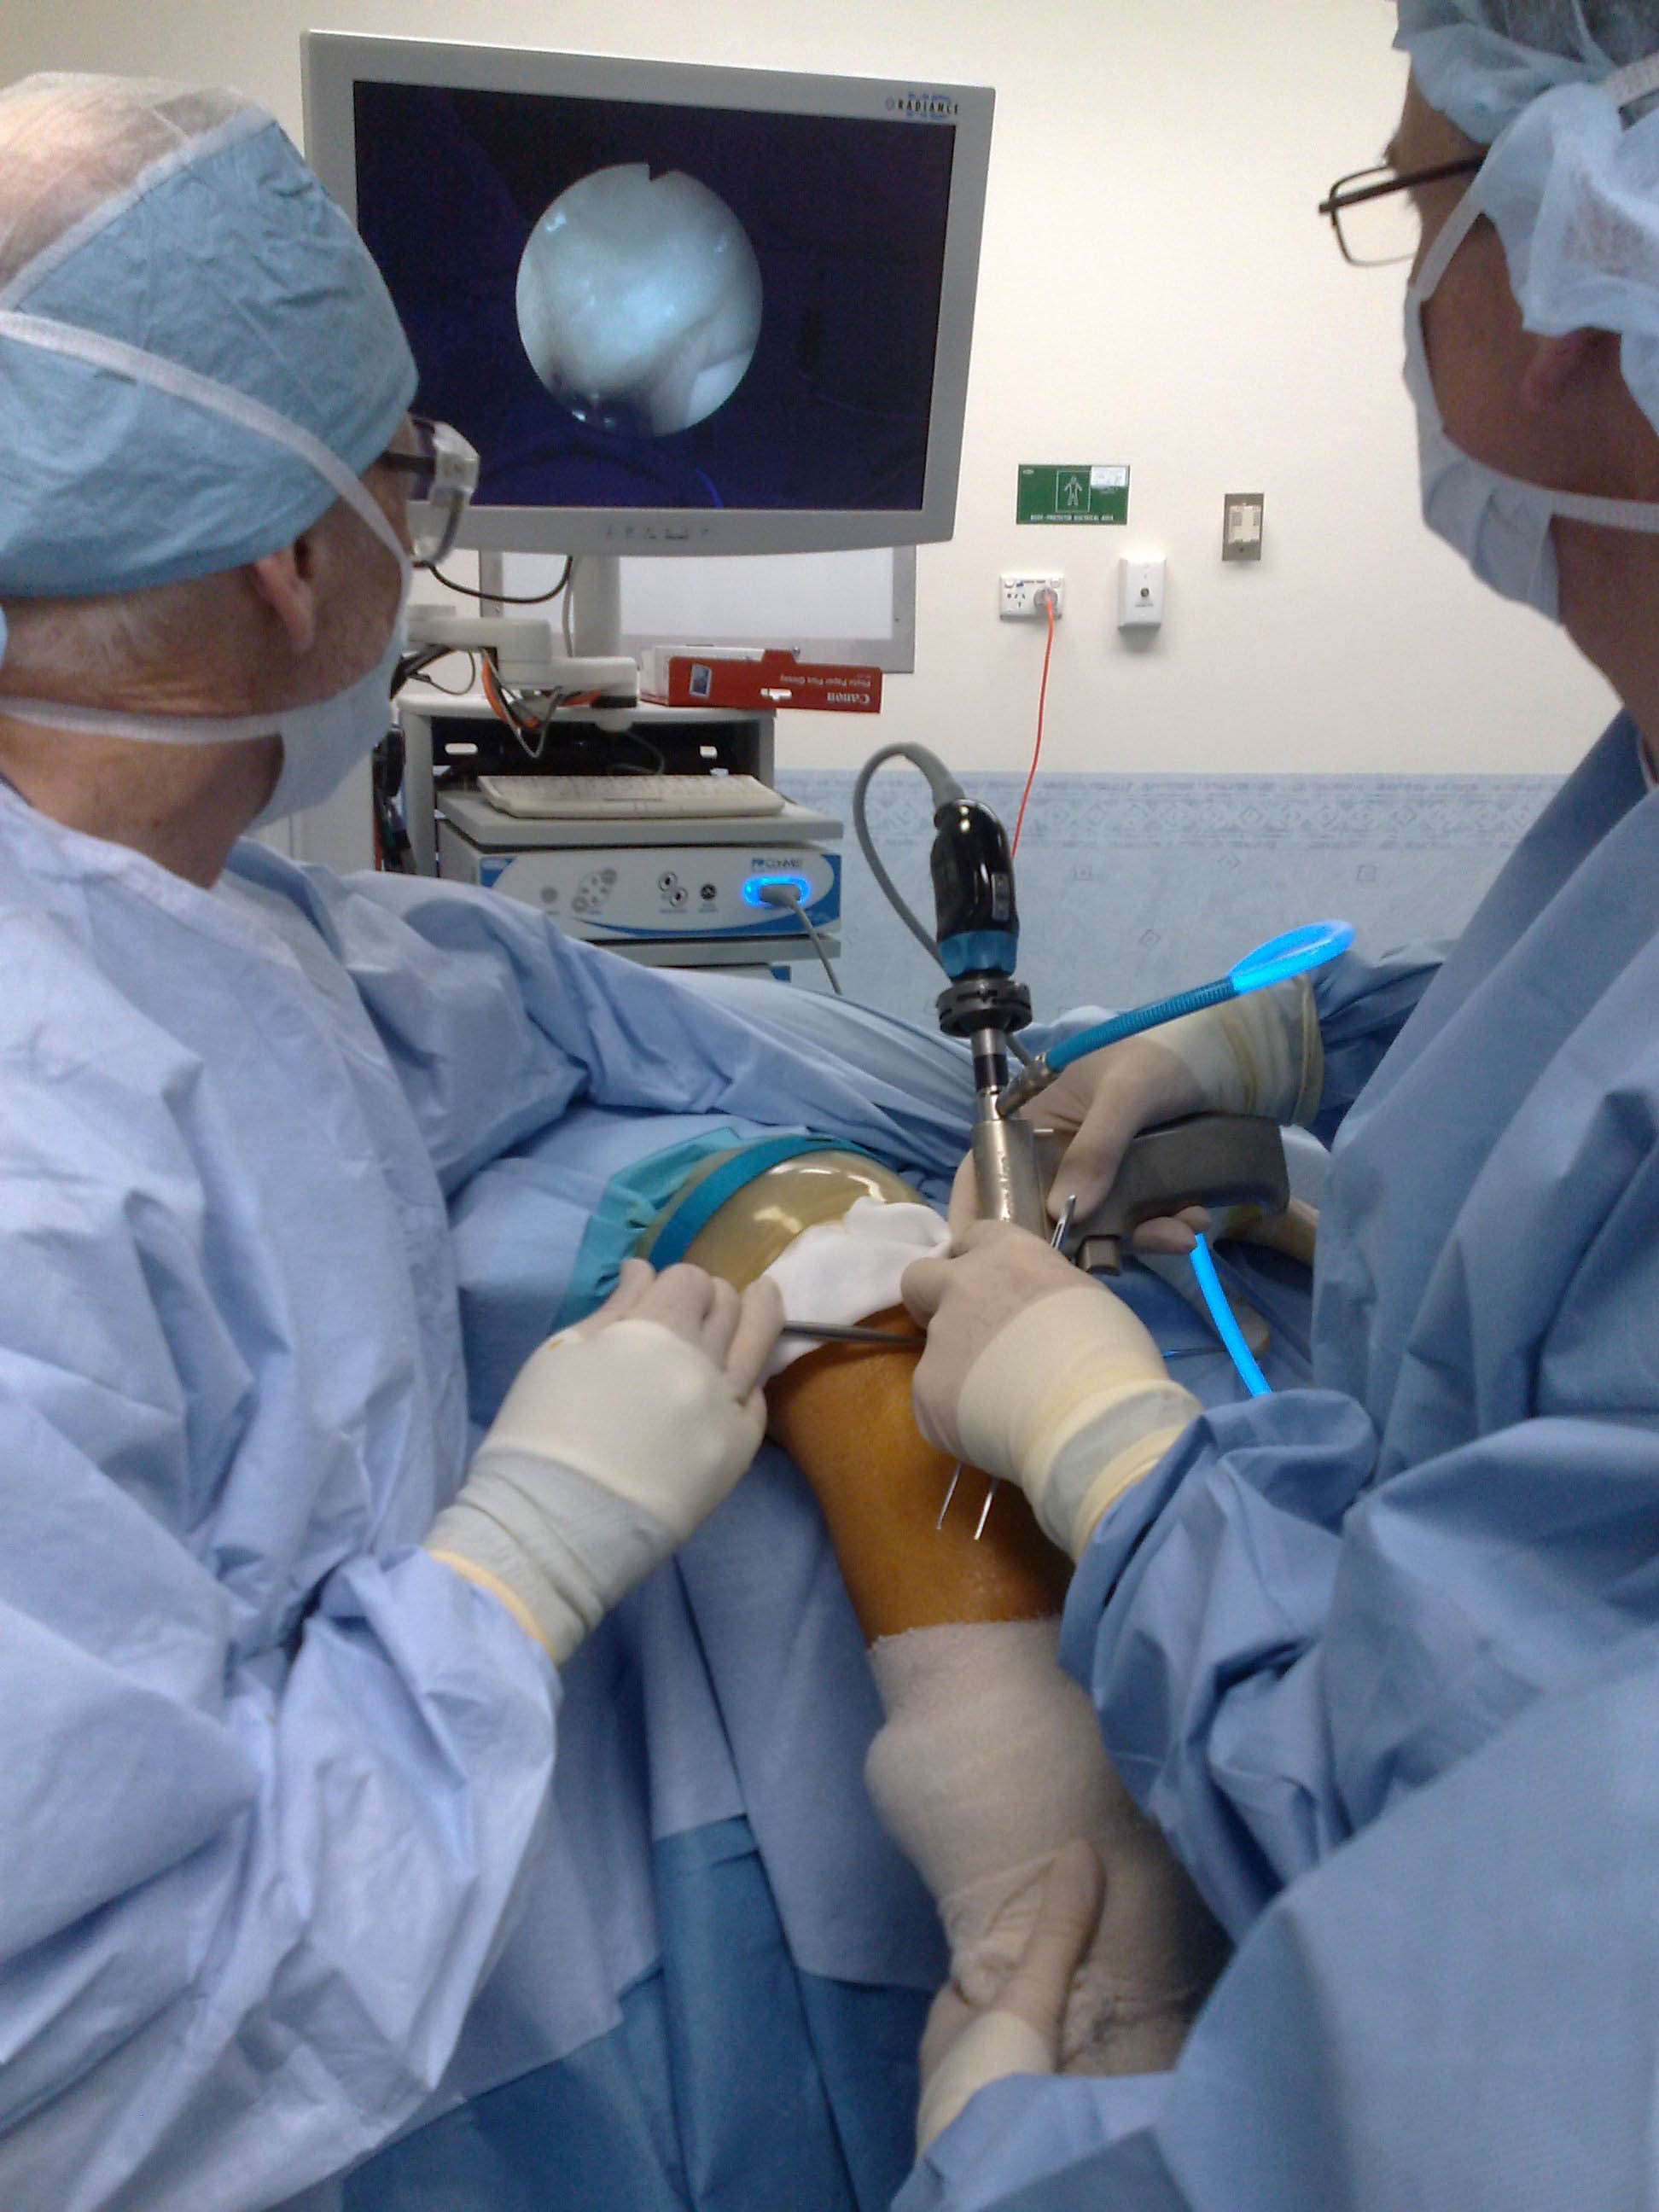 Figure 5: Endoscopic cubital tunnel decompression using the Microaire “Agee” device